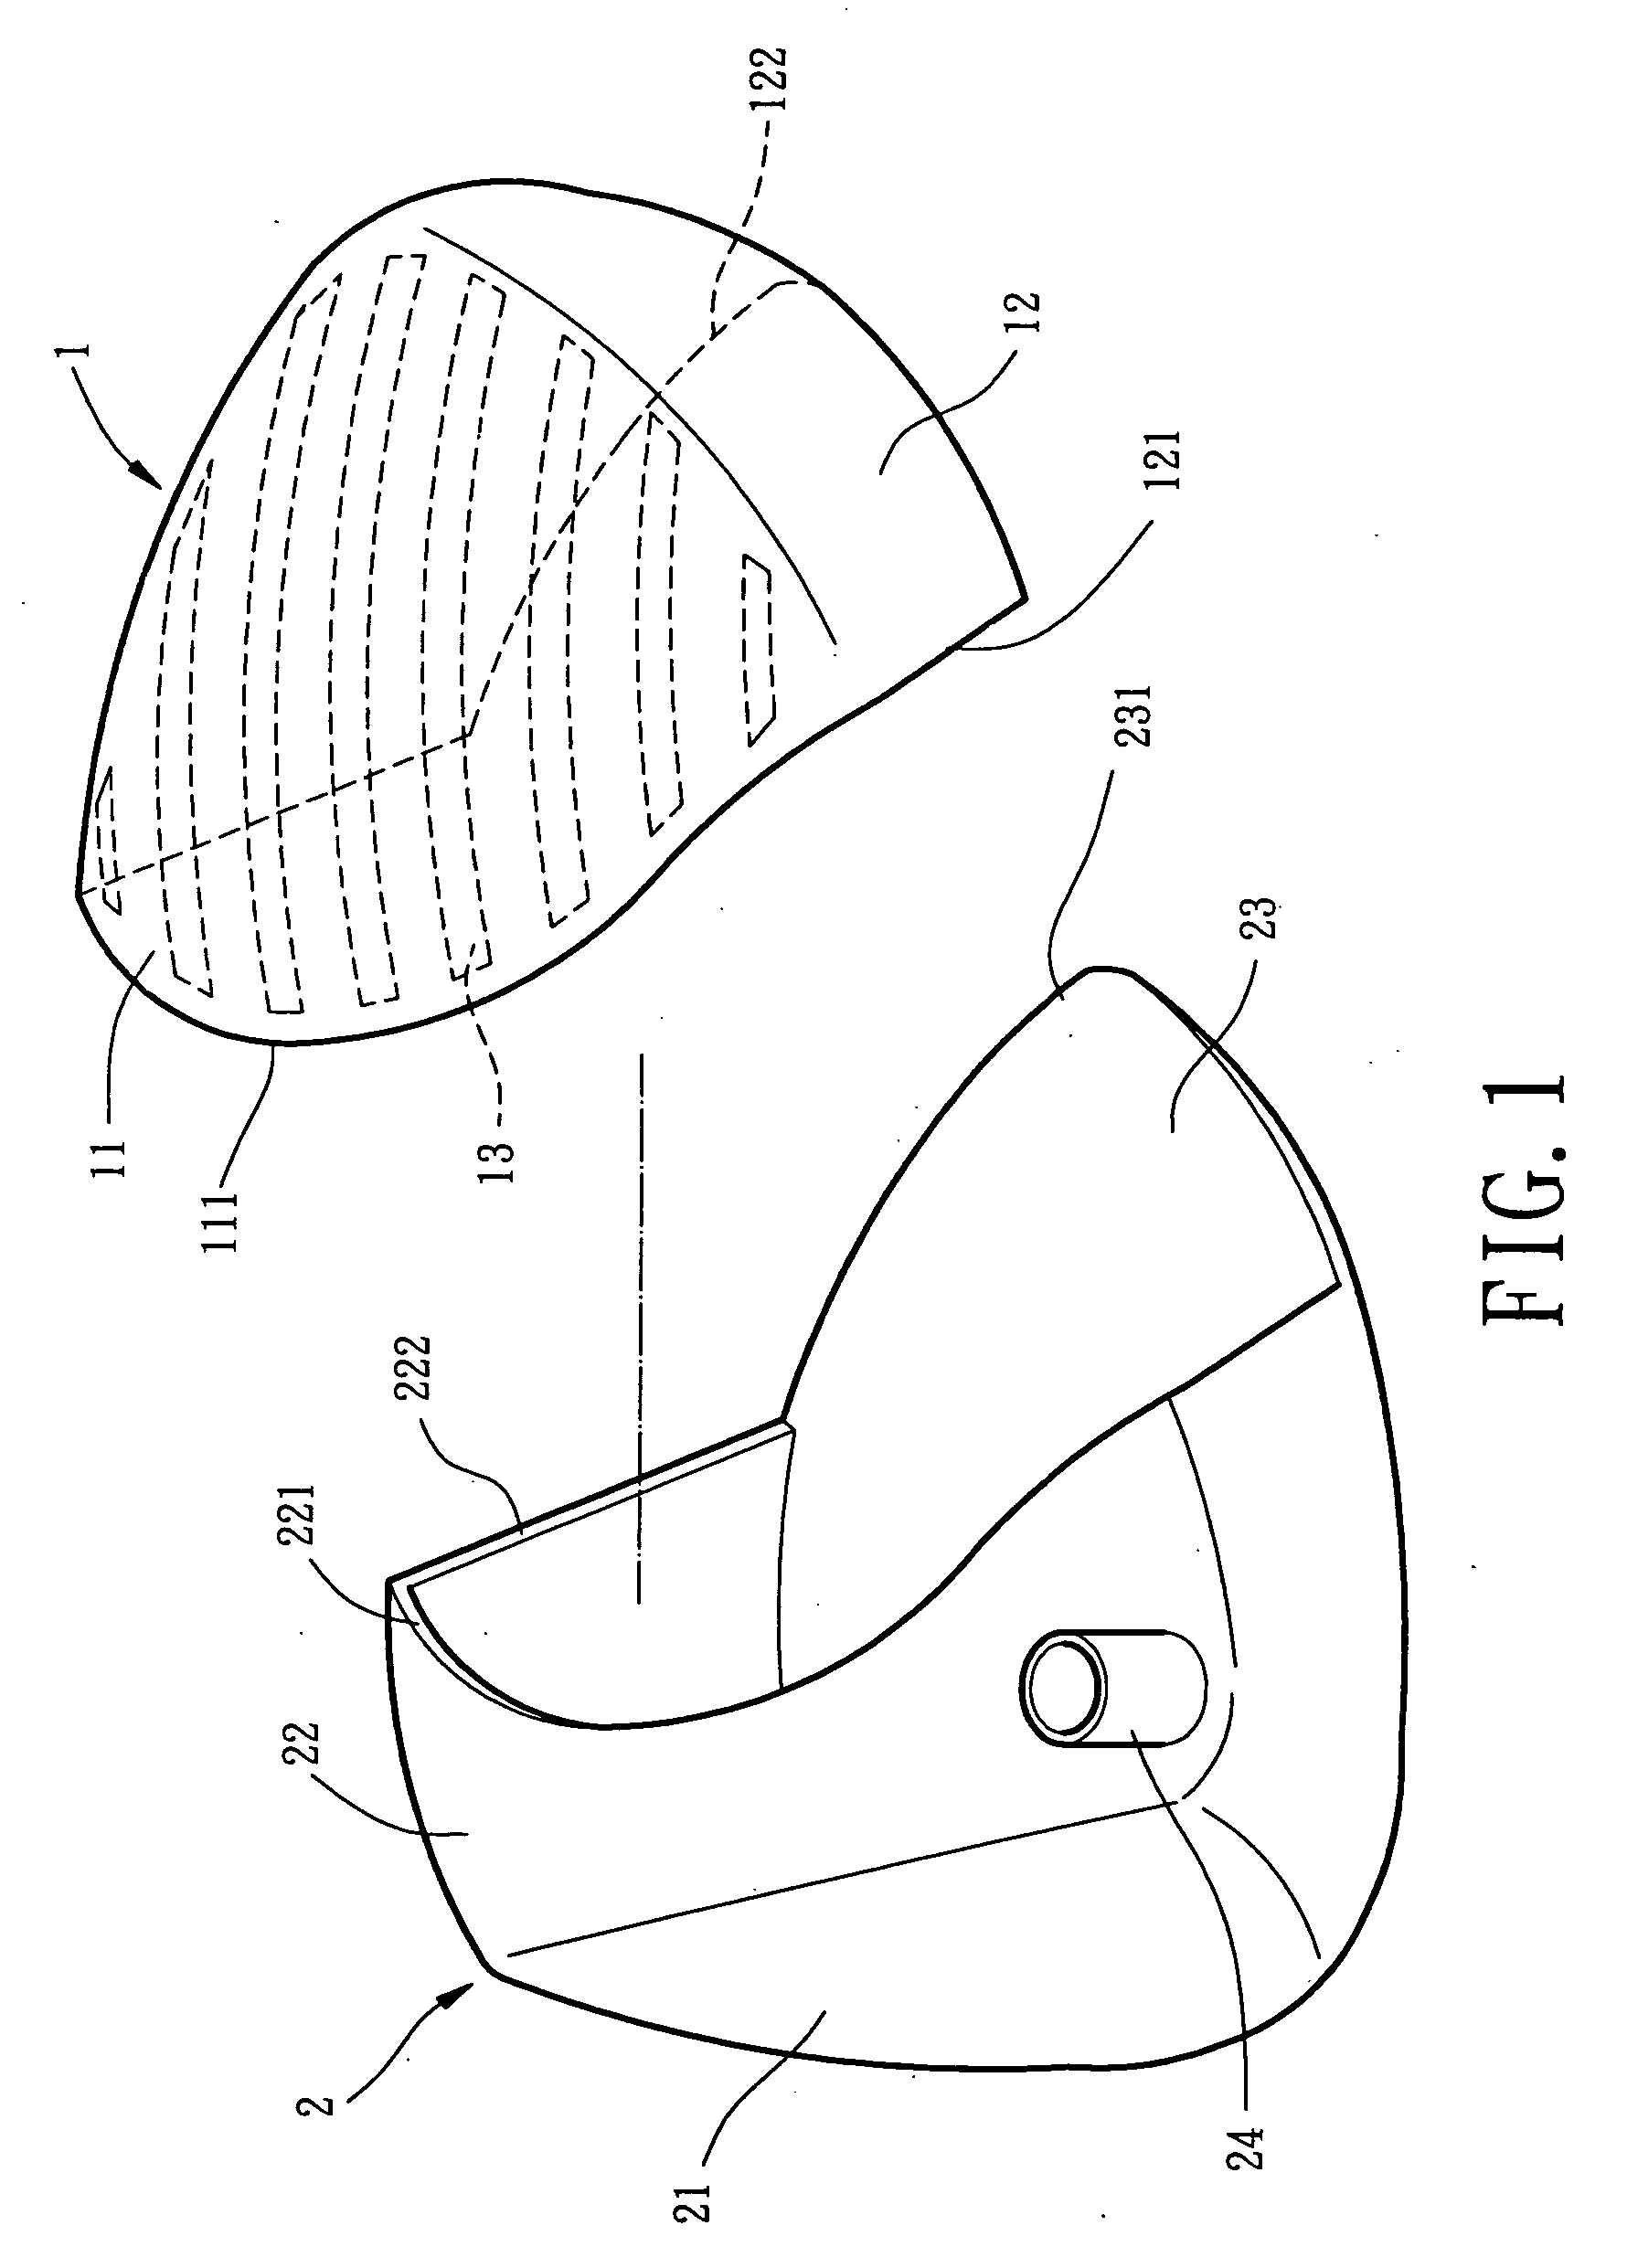 Weight-adjustable golf club head provided with rear lightweight covering